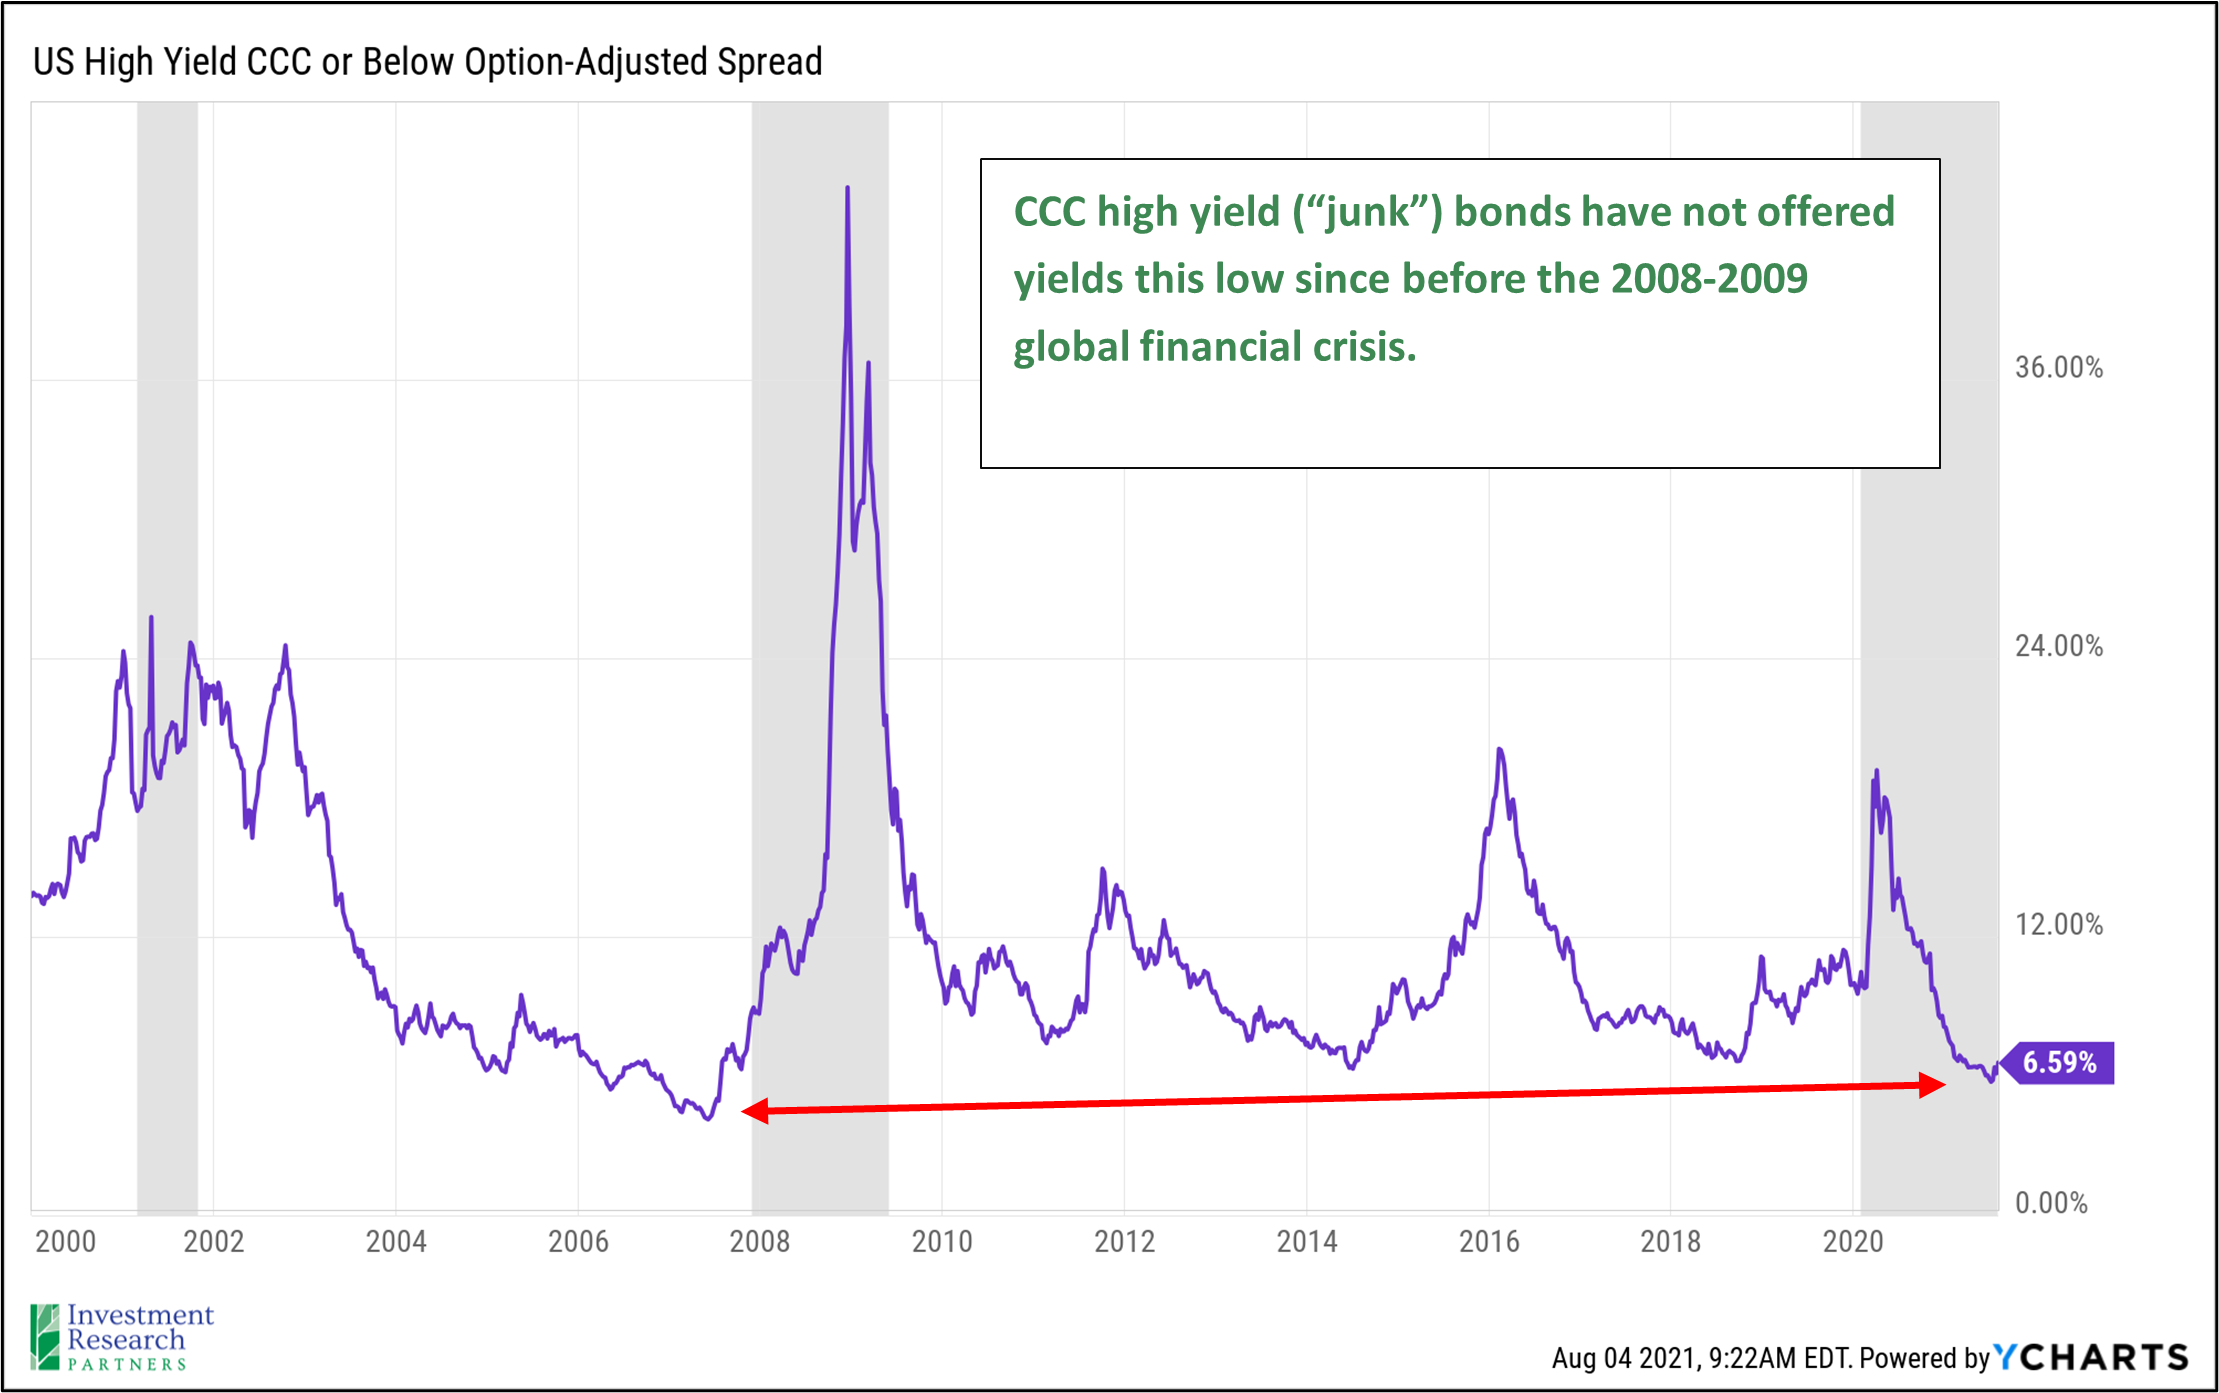 Line graph depicting US High Yield CCC or Below Option-Adjusted Spread from 2000 to 2021 with note: CCC high yield ('junk') bonds have not offered yields this low since before the 2008-2009 global financial crisis.